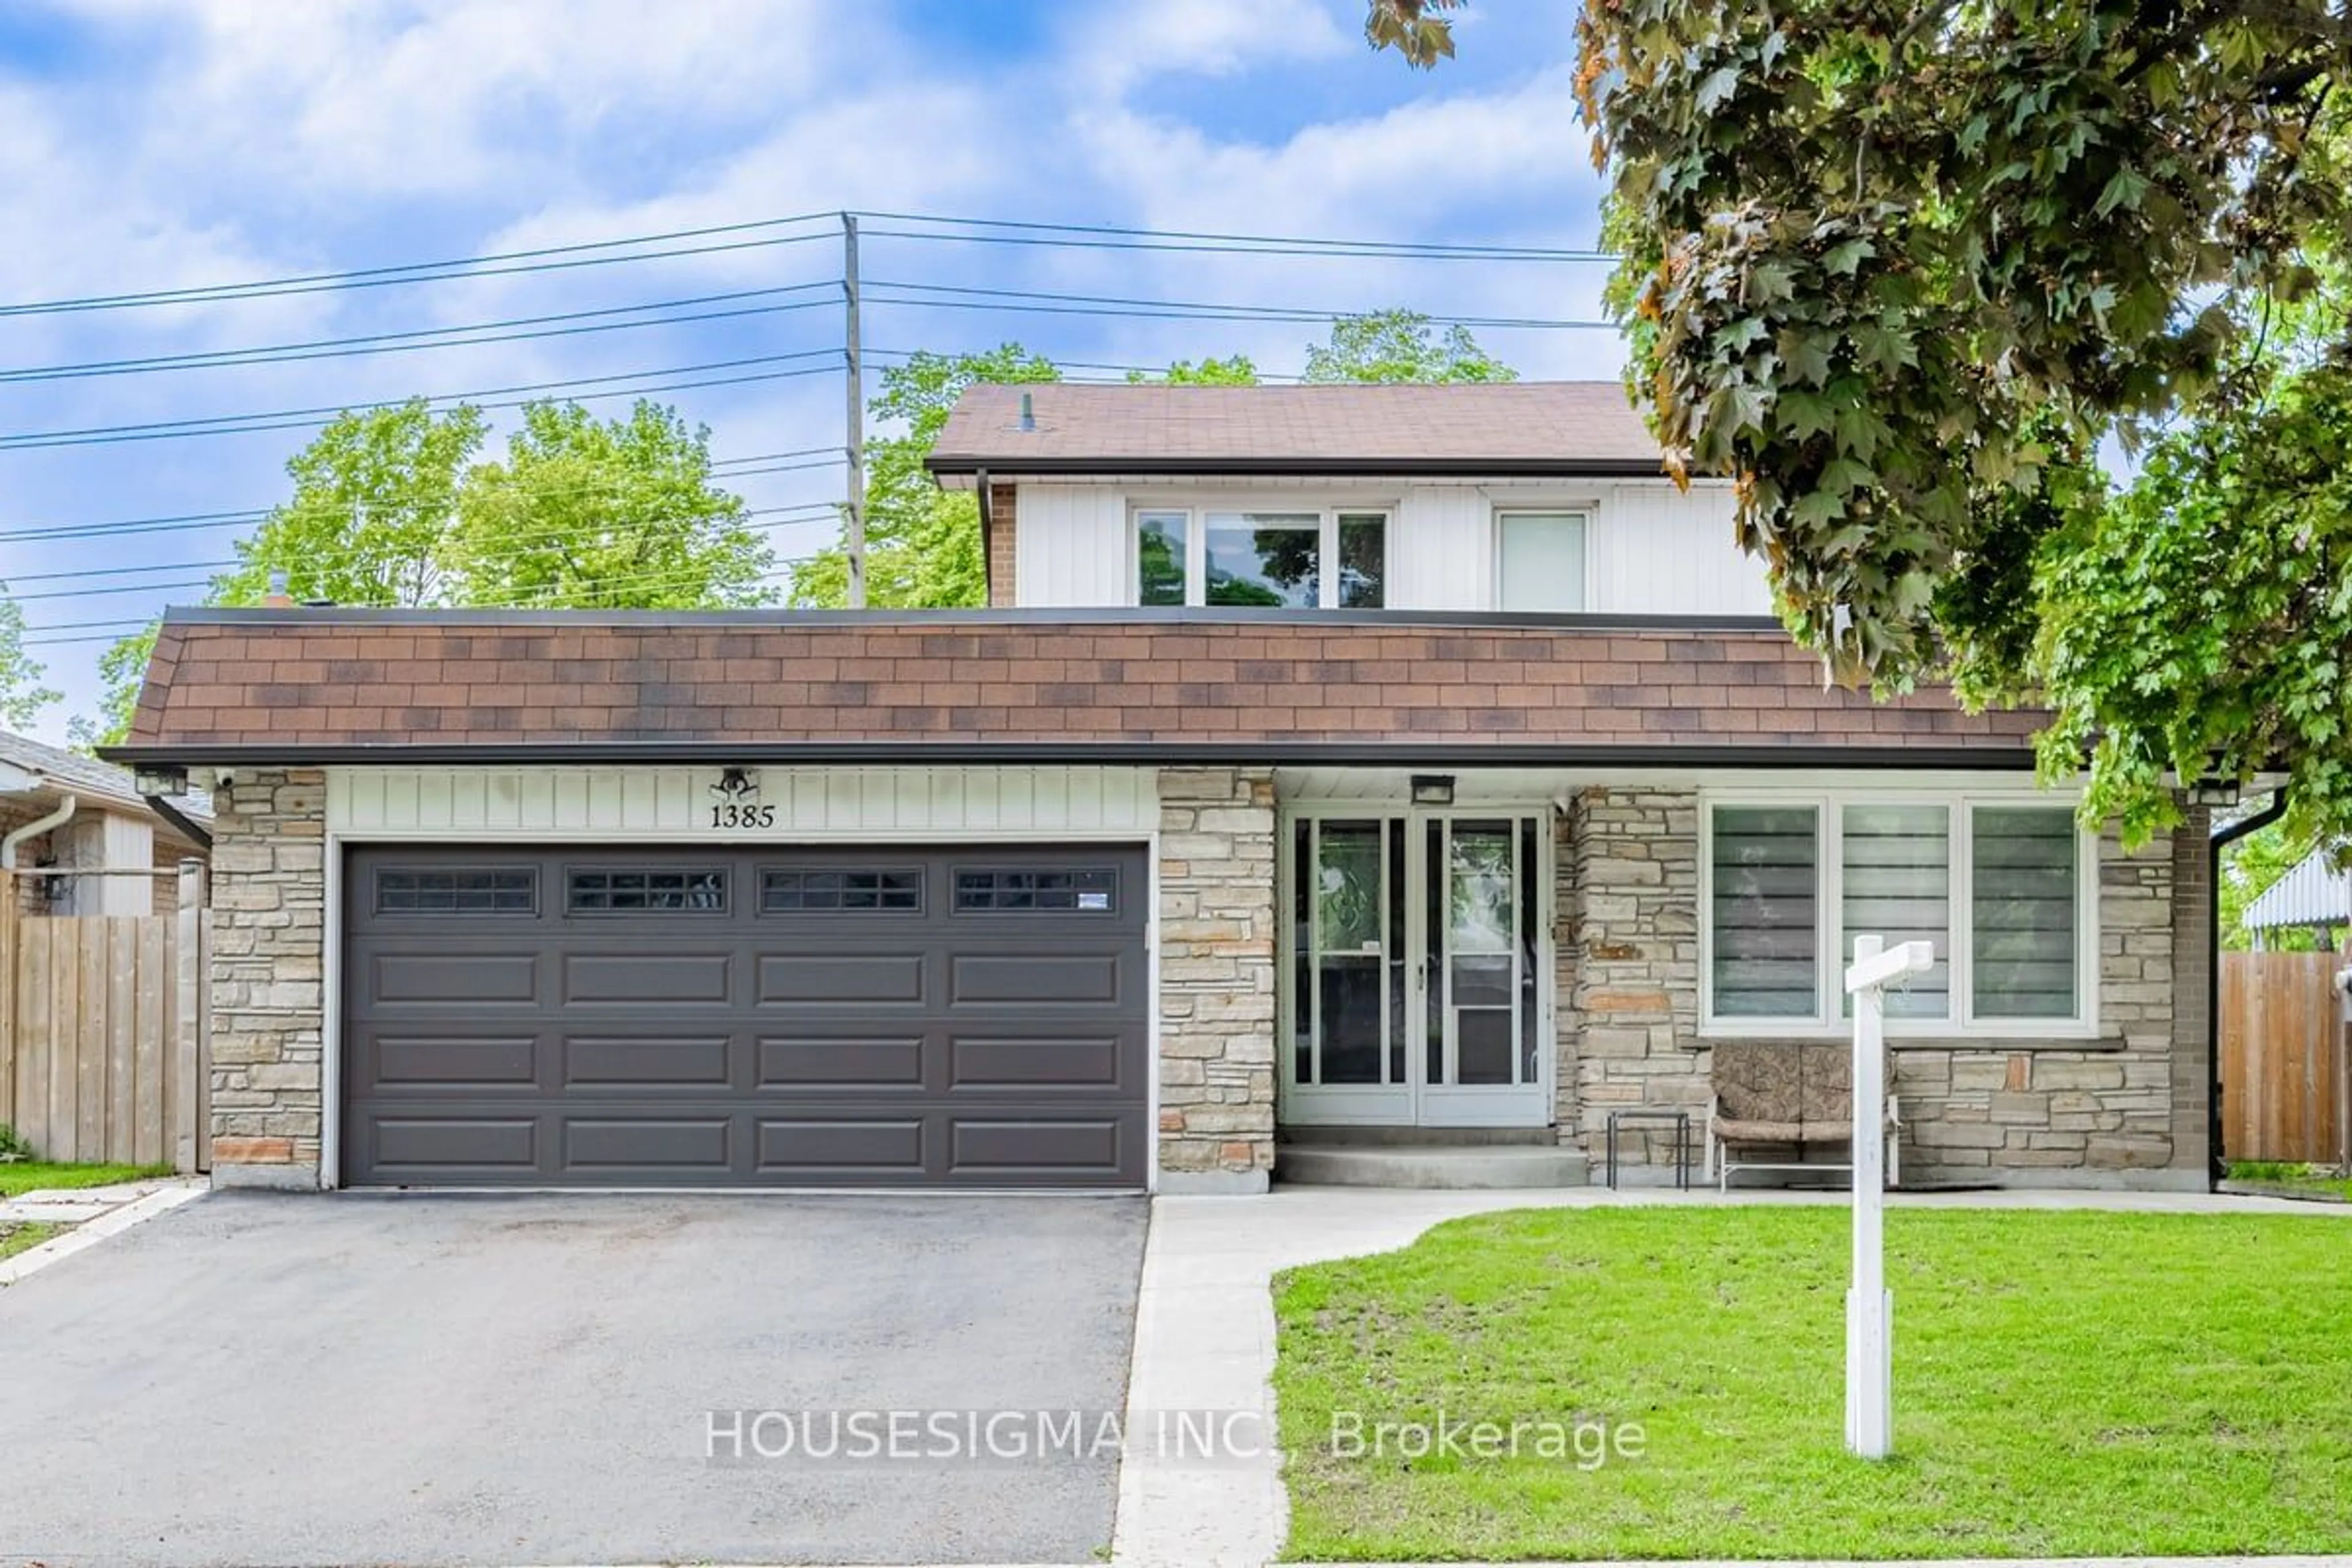 Home with brick exterior material for 1385 Tyneburn Cres, Mississauga Ontario L4X 1P6